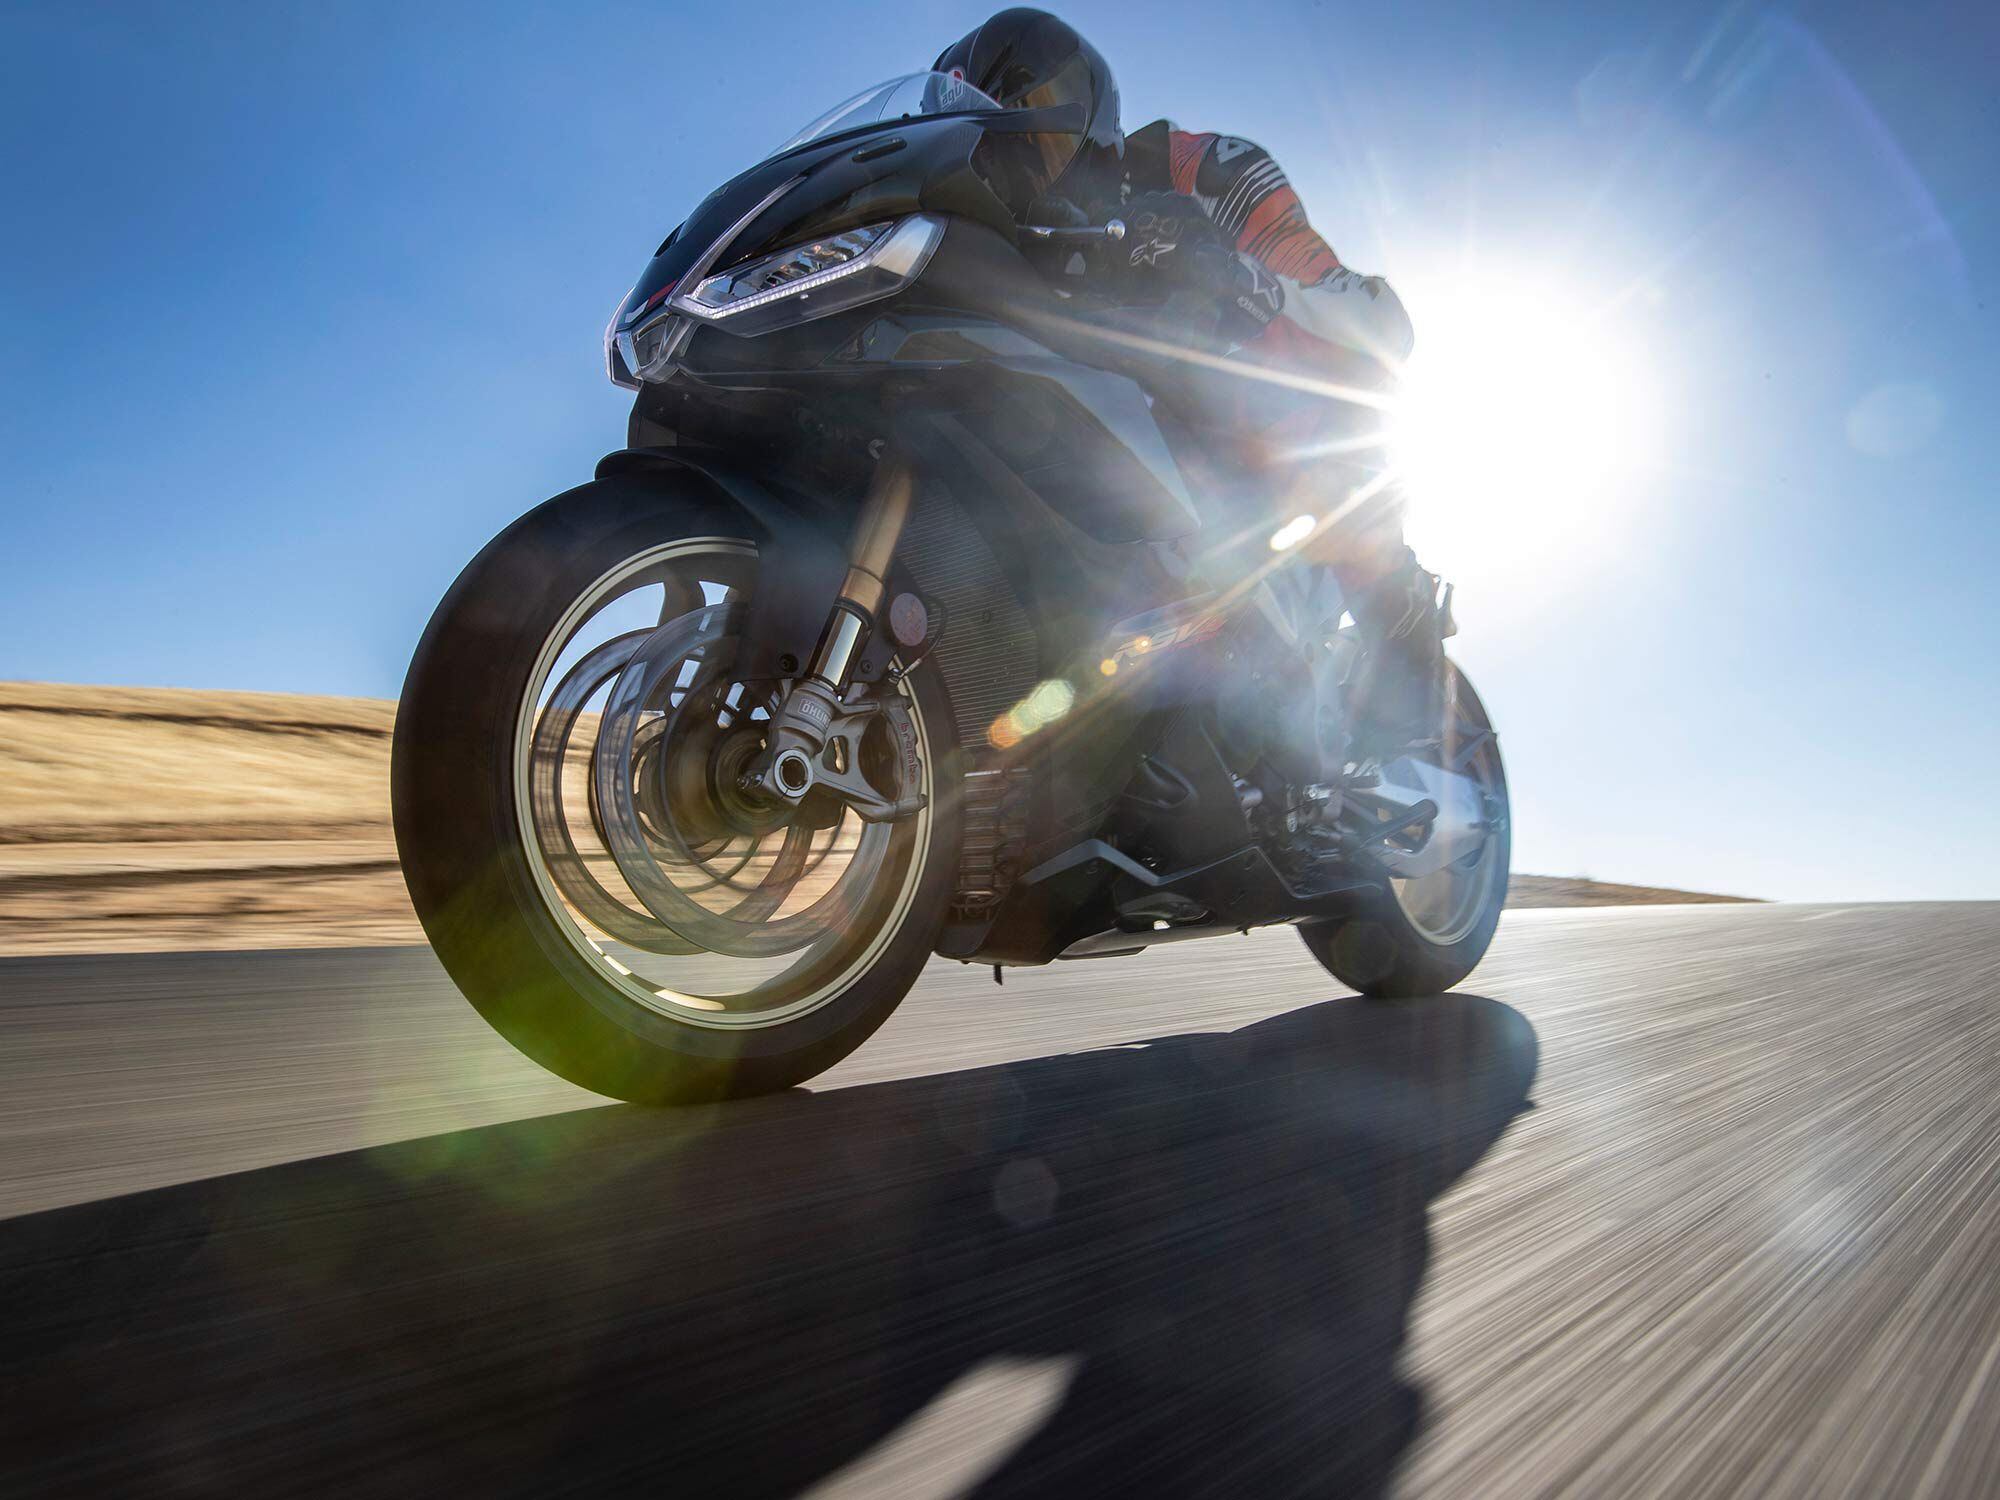 To the oncoming air, the front end of even the slickest superbike is messy.